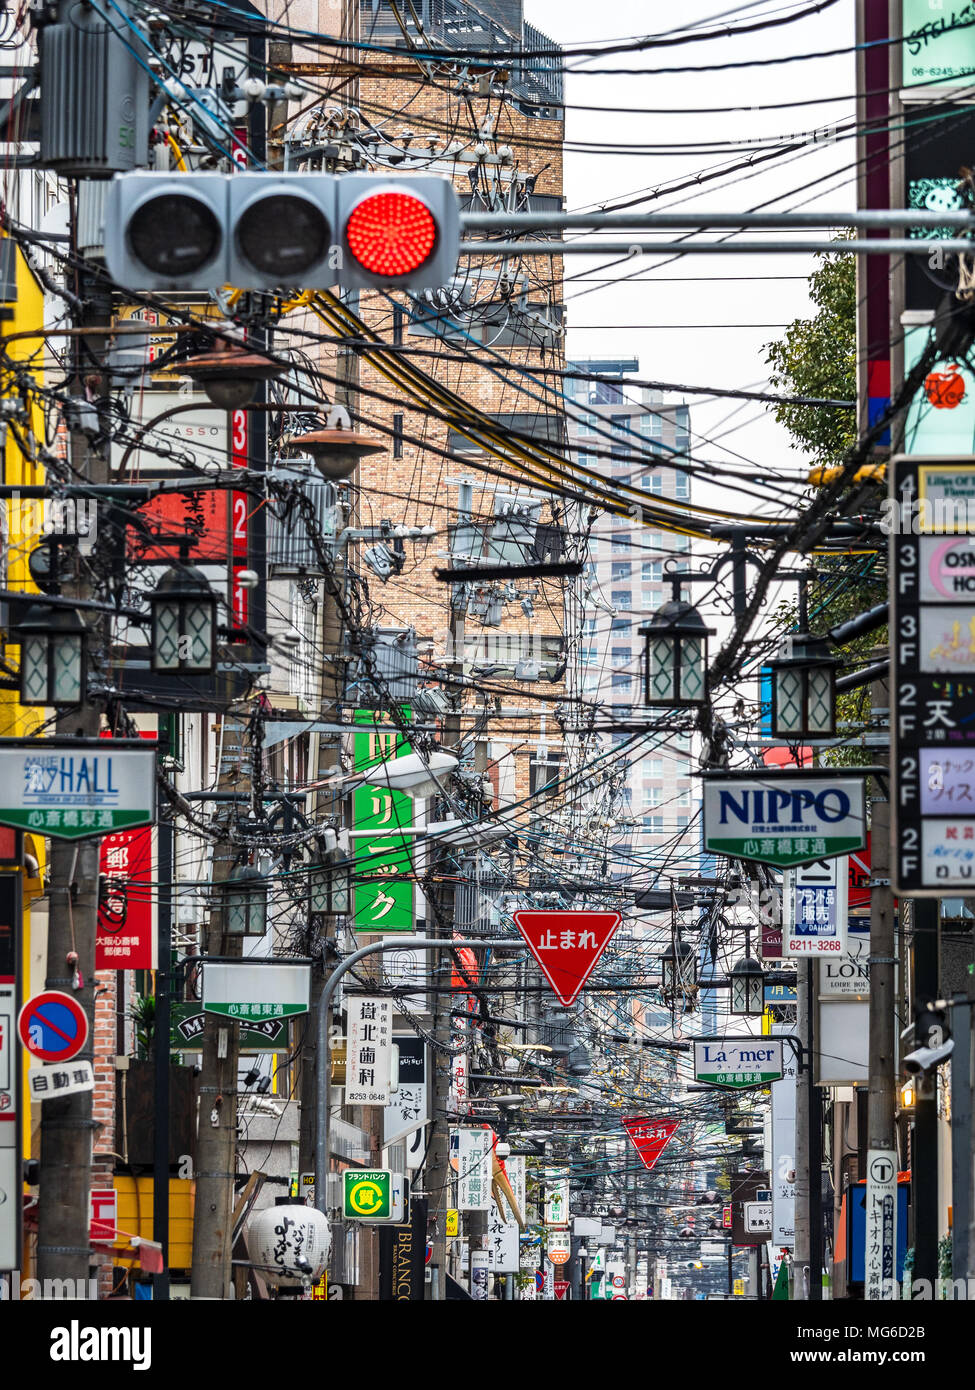 Japan Osaka Congested overhead cables in a street in Osaka Japan. Unlike most advanced nations the majority of Japan’s power grid remains above ground. Stock Photo